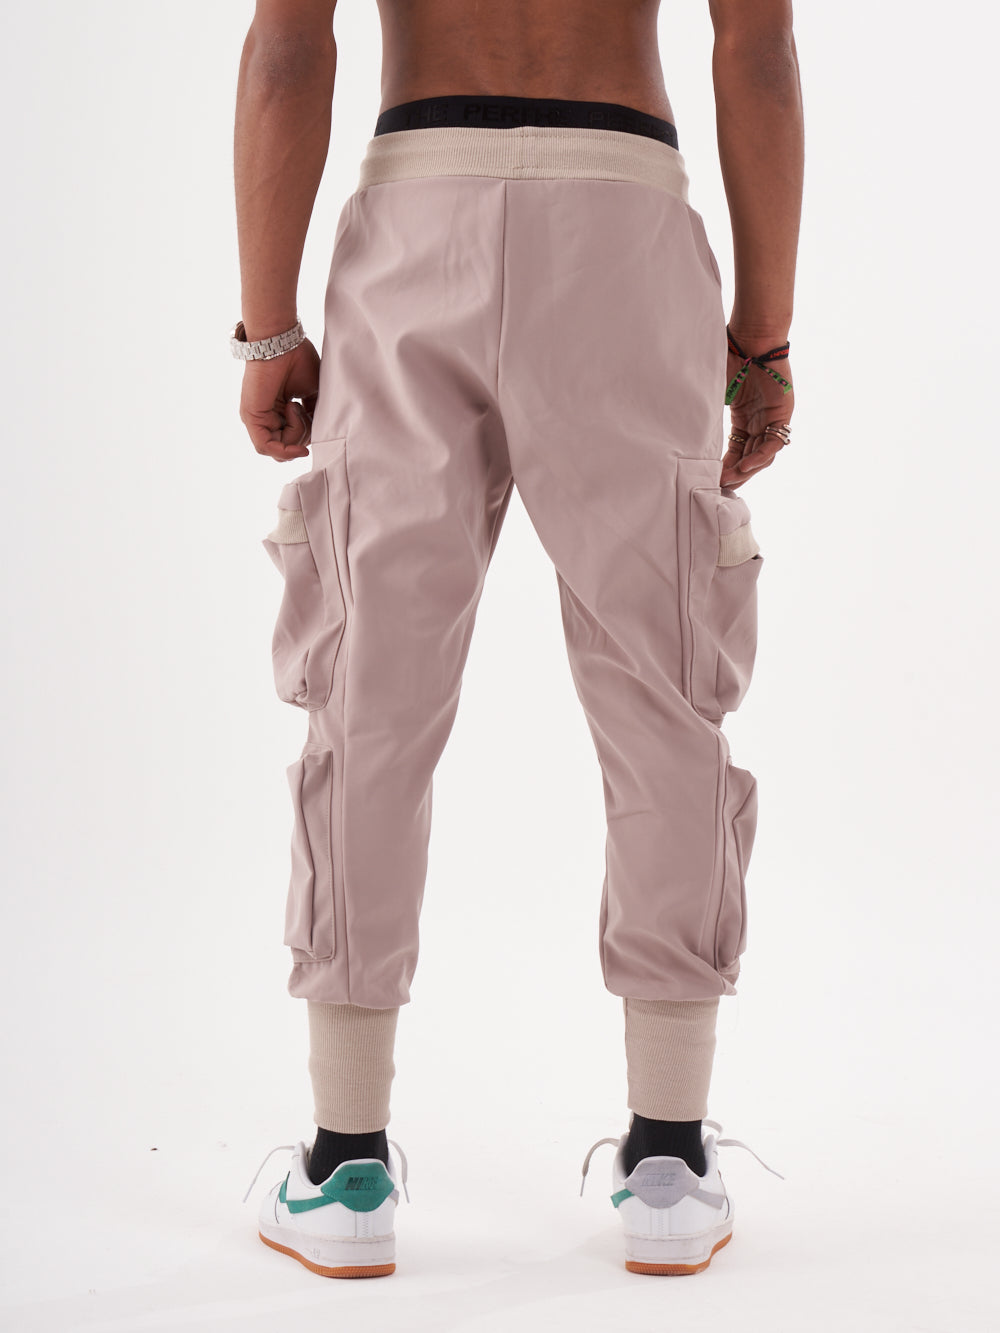 The back view of a man wearing OUTLIER | MAUVE cargo pants.